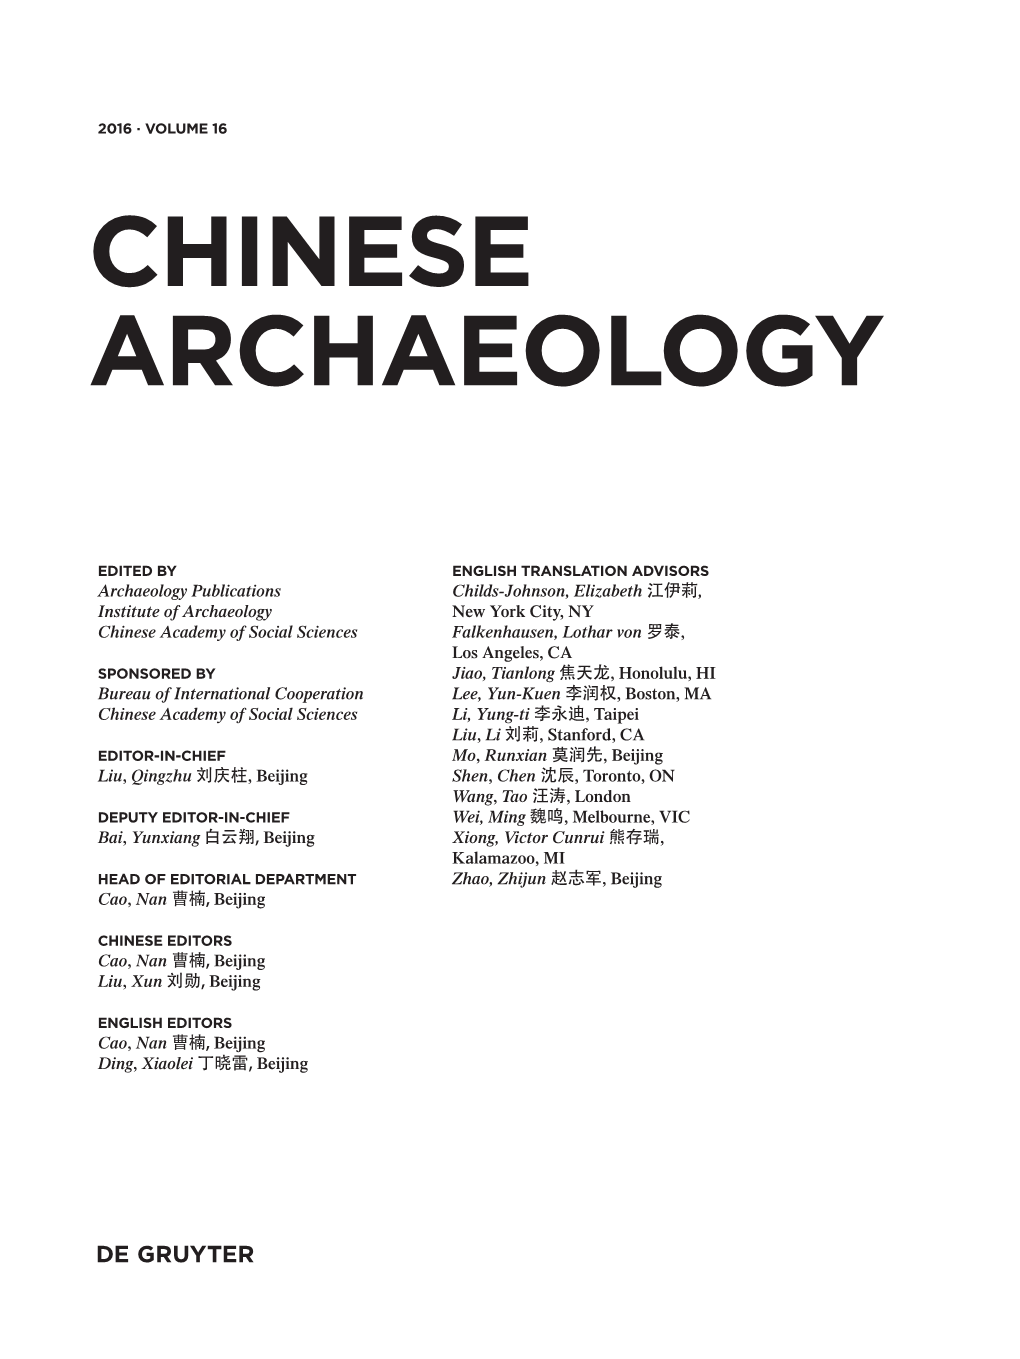 Chinese Archaeology